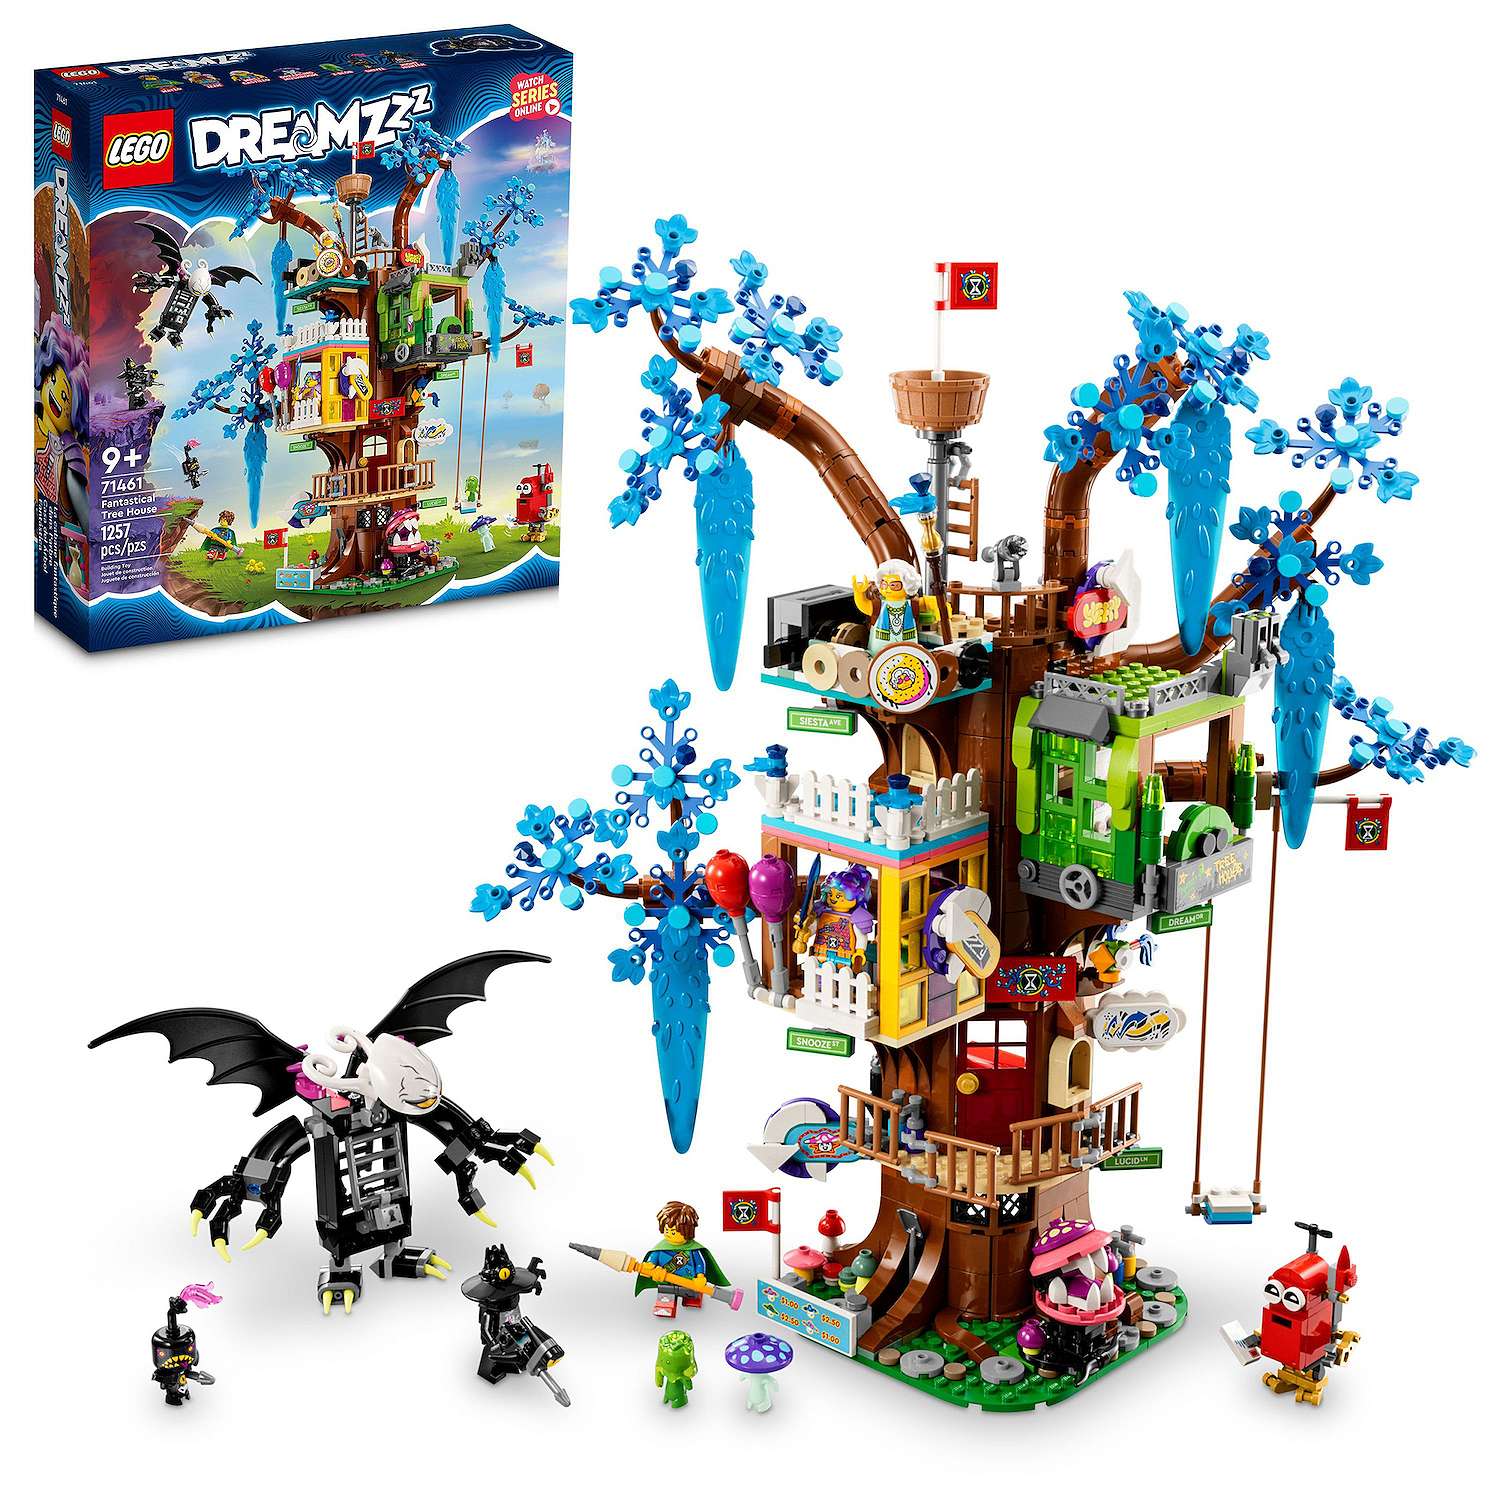 1257-Piece Lego Dreamzzz Fantastical Tree House Imaginative Play Building Toy (71461) $69.80 + Free Shipping